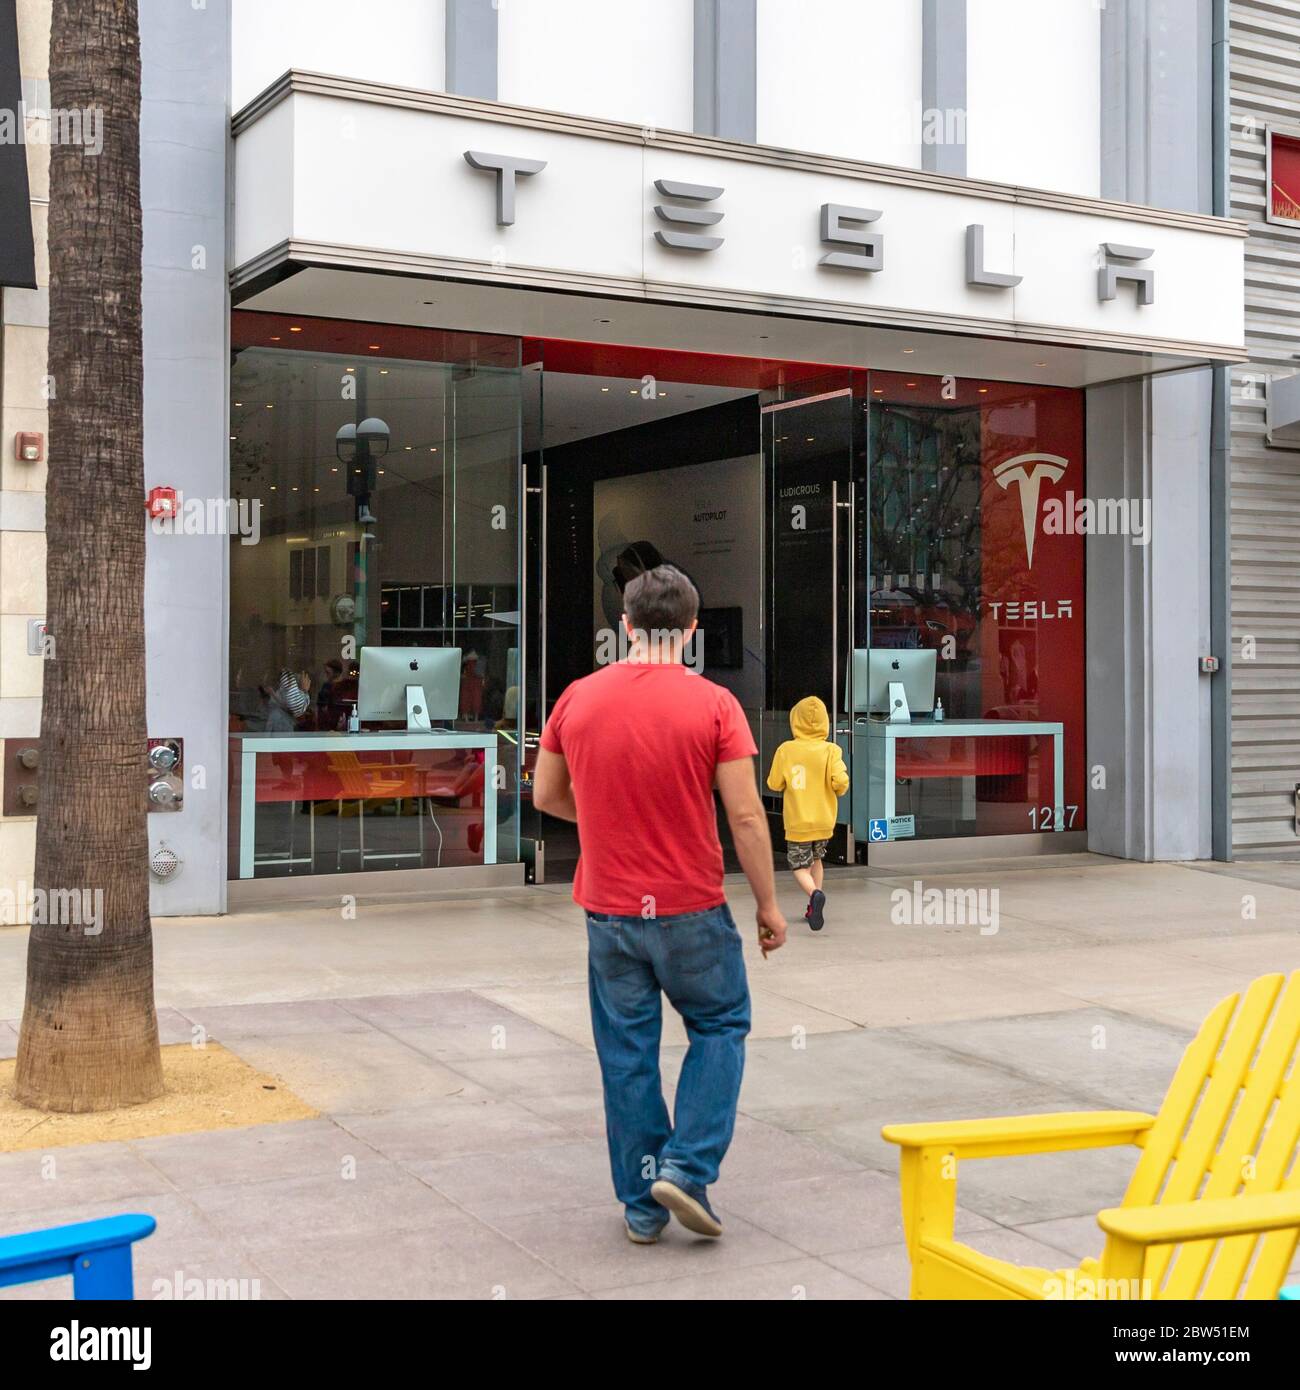 Santa Monica, California, USA. 15th Apr, 2019. Tesla, Inc. (formerly Tesla Motors, Inc.), is an American electric vehicle and clean energy company based in Palo Alto, California. The company specializes in electric vehicle manufacturing, battery energy storage from home to grid scale and, through its acquisition of SolarCity, solar panel and solar roof tile manufacturing. Credit: Alexey Bychkov/ZUMA Wire/Alamy Live News Stock Photo